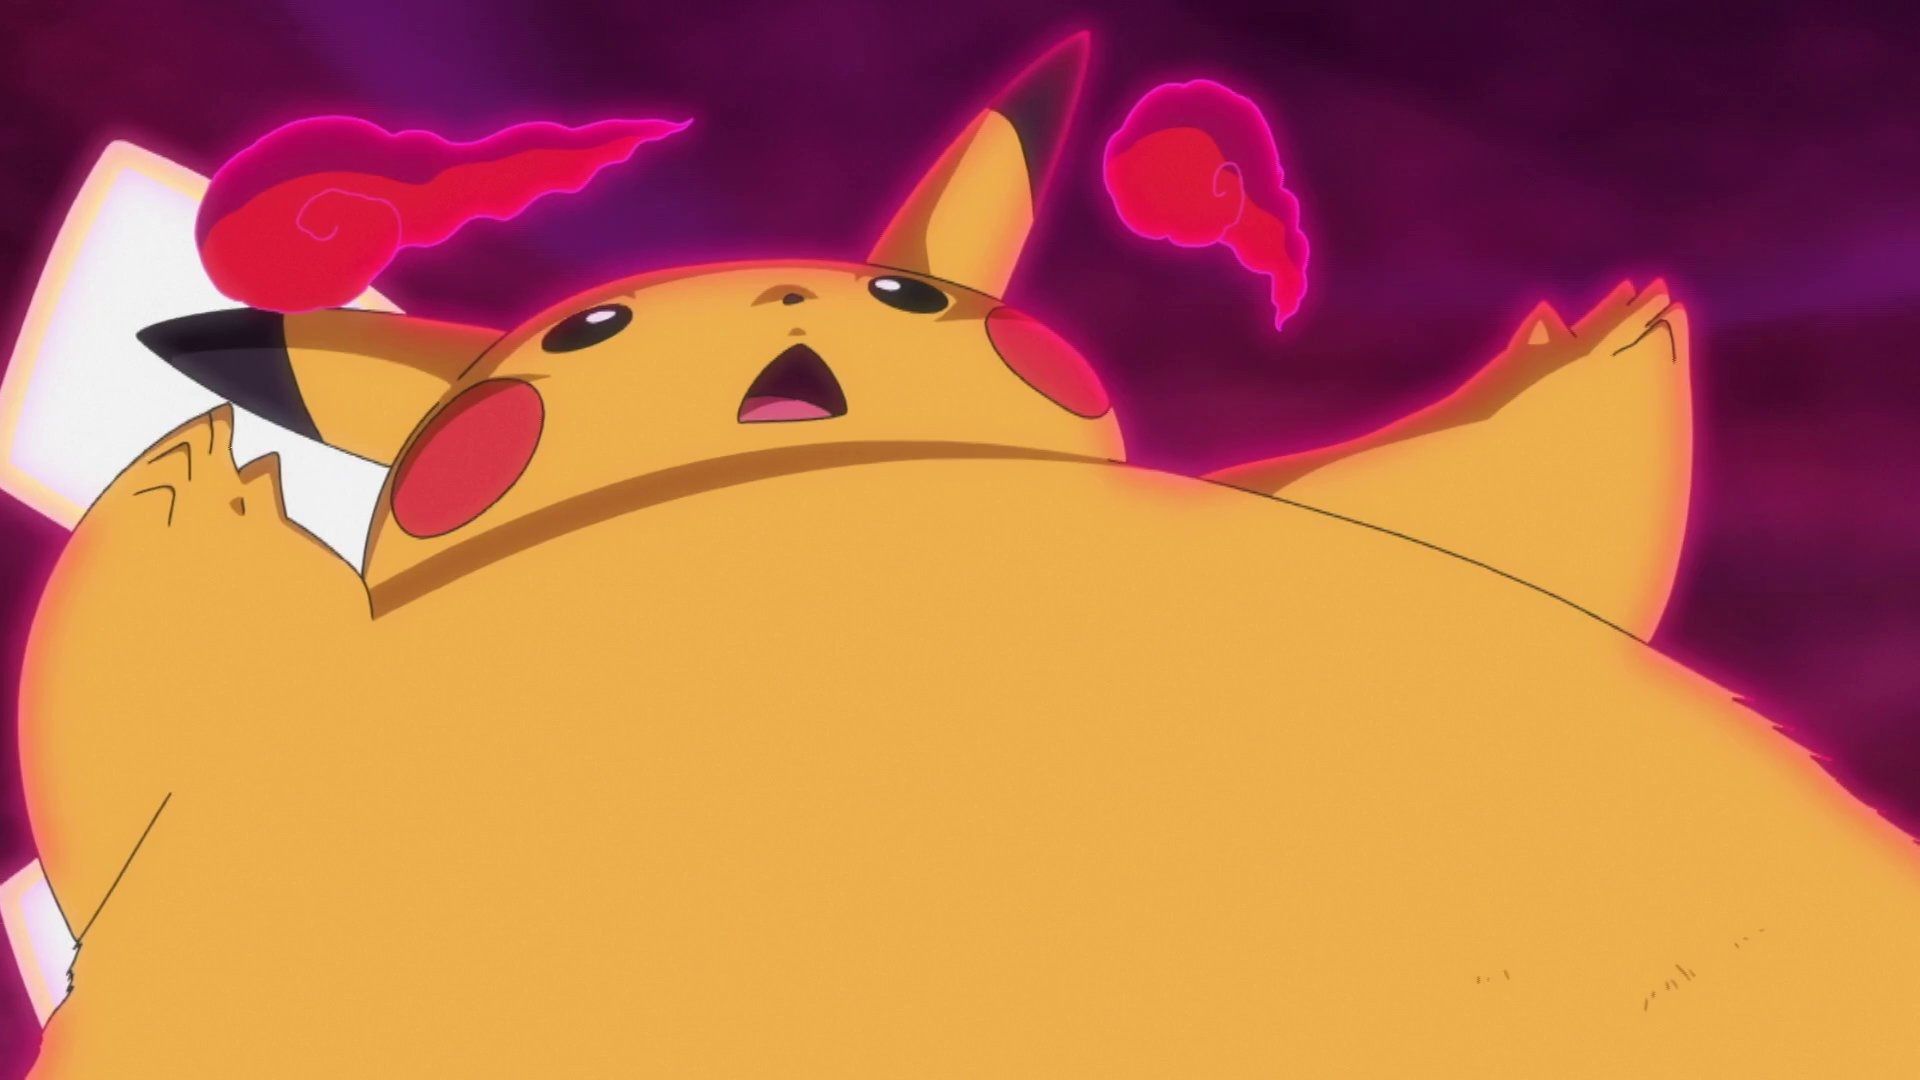 Ash's Pikachu Gigantamax Evolved in the Anime and Was a Big Boy Again